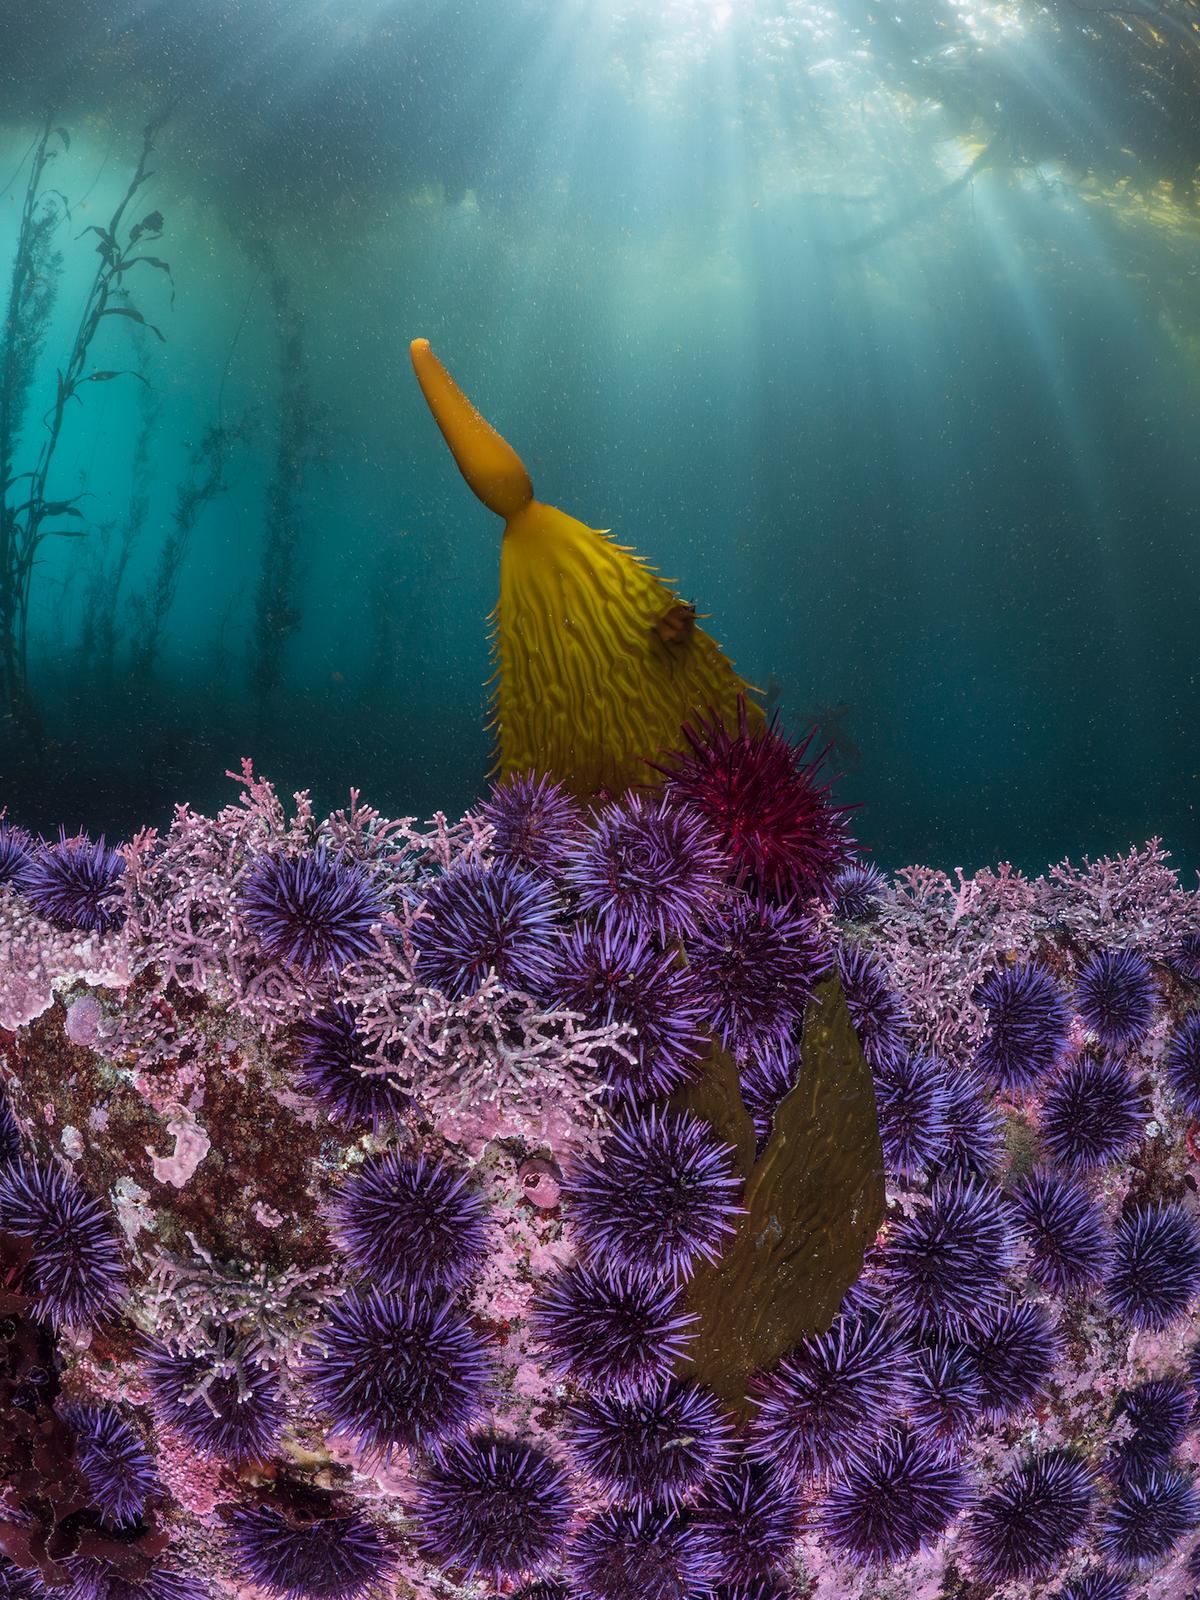 "Blades and Spines," by Kate Vylet was the Aquatic Life winner. (Courtesy of <a href="https://www.bigpicturecompetition.org/">BigPicture Natural World Photography Competition</a> and <a href="https://www.biographic.com/the-big-picture-2023/">bioGraphic</a>)